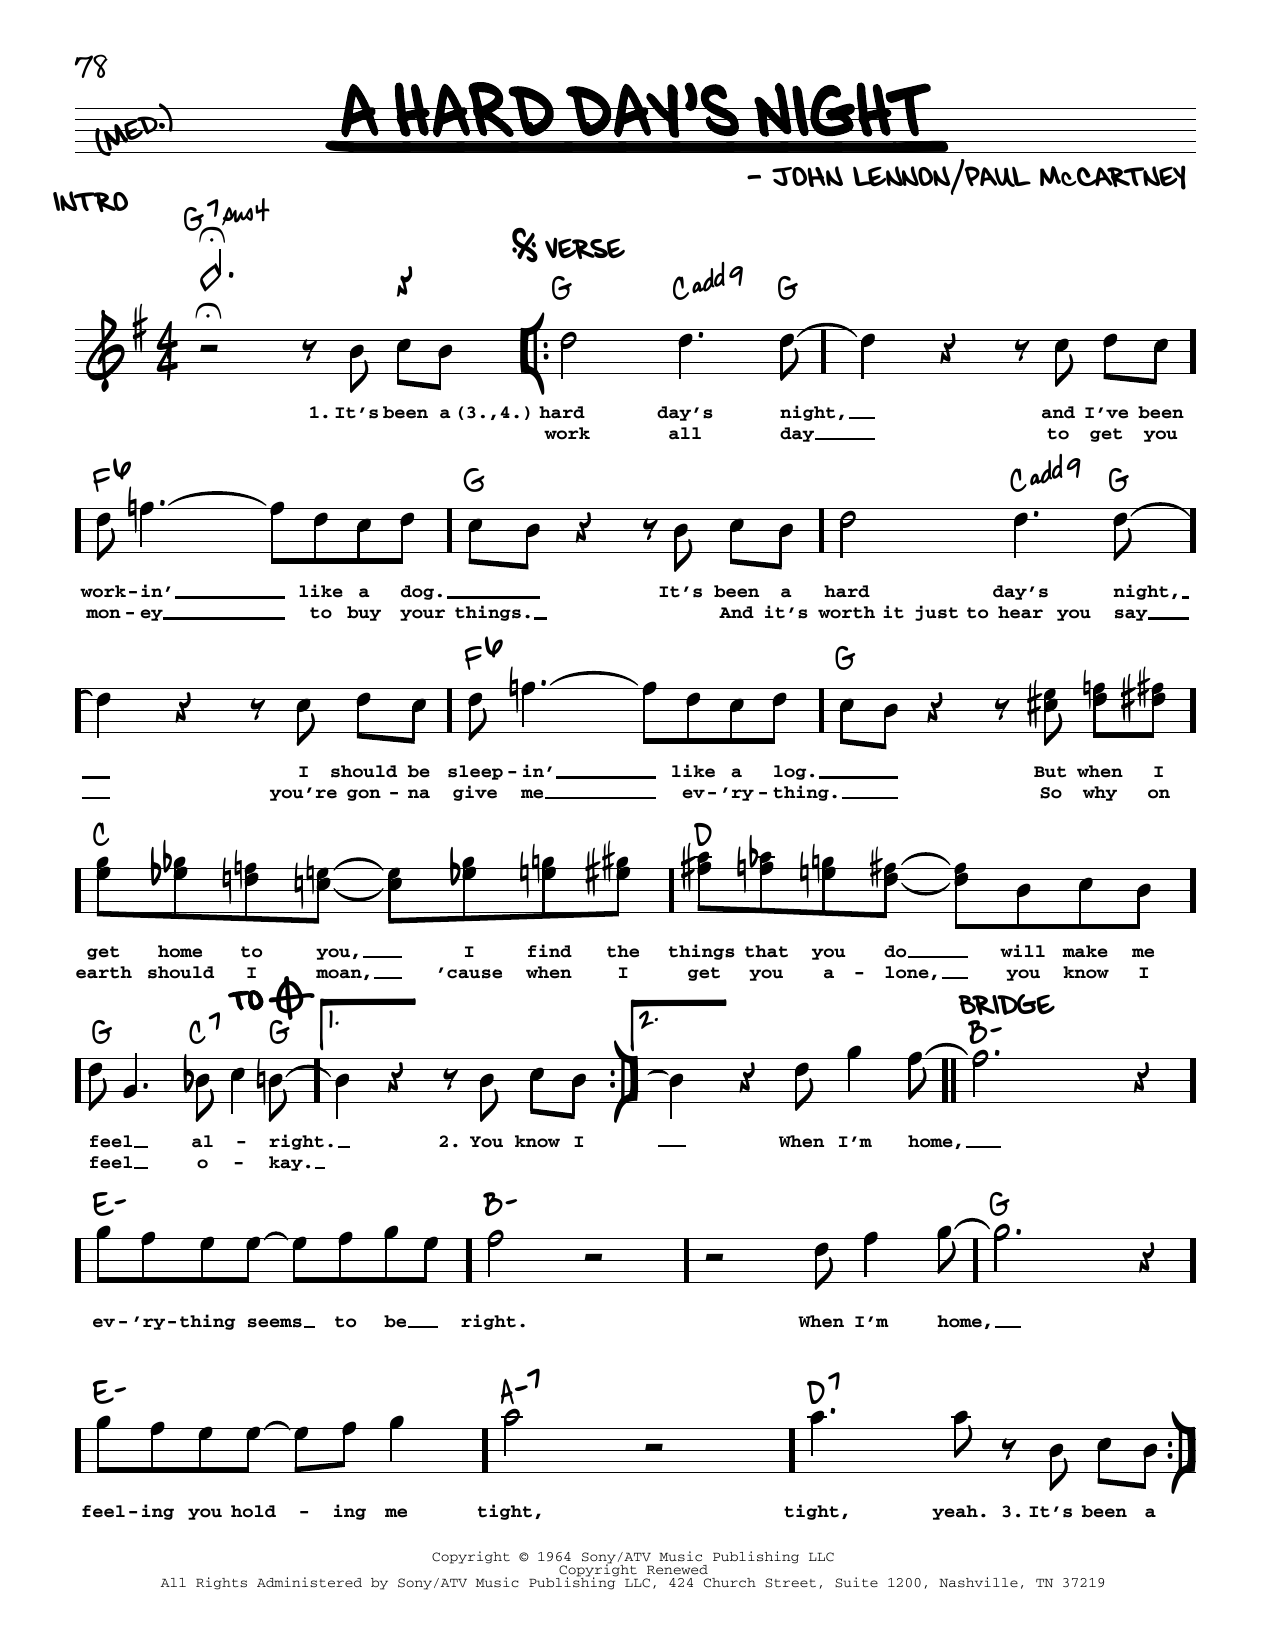 Download The Beatles A Hard Day's Night [Jazz version] Sheet Music